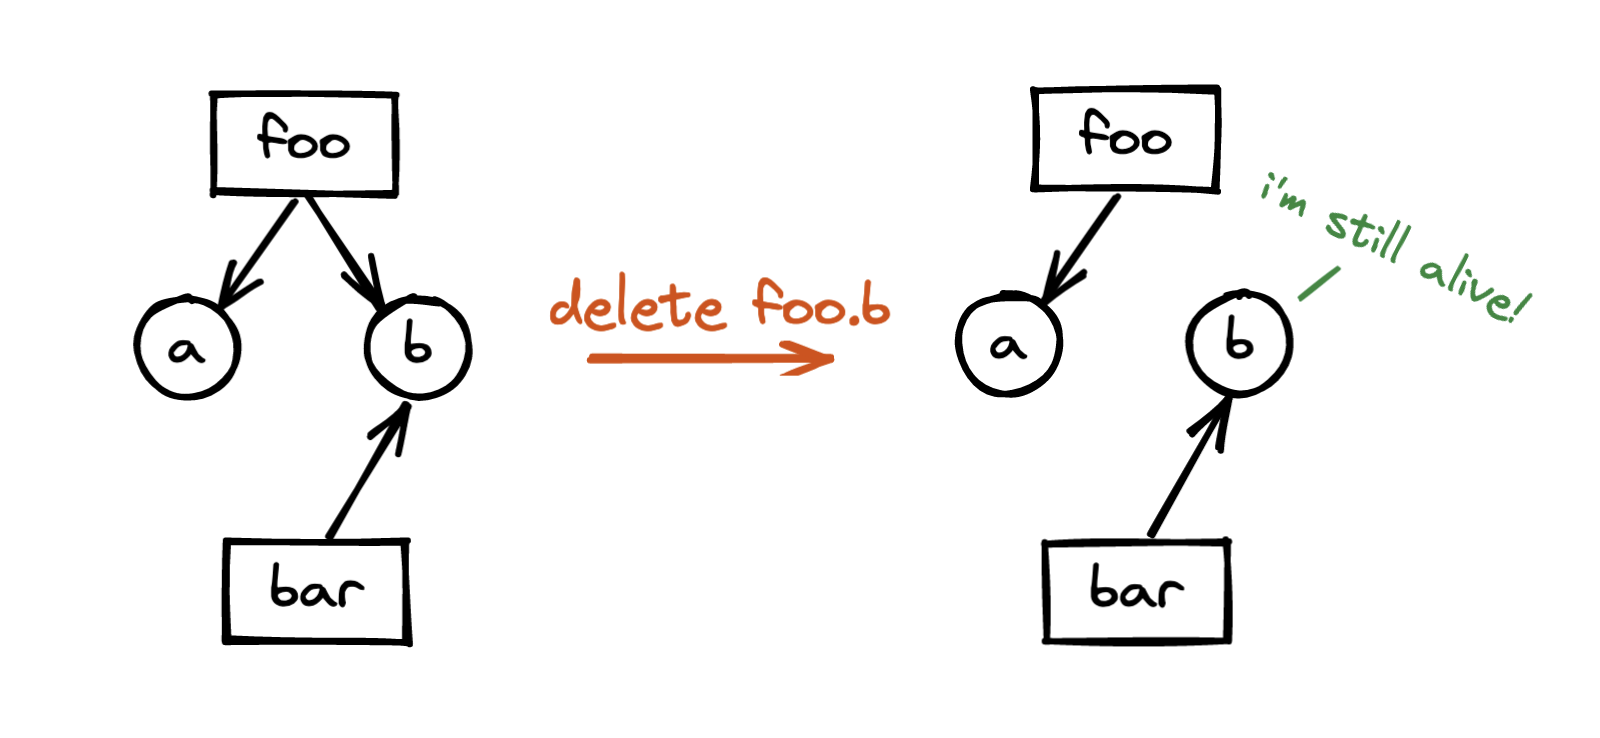 delete-object-with-ref